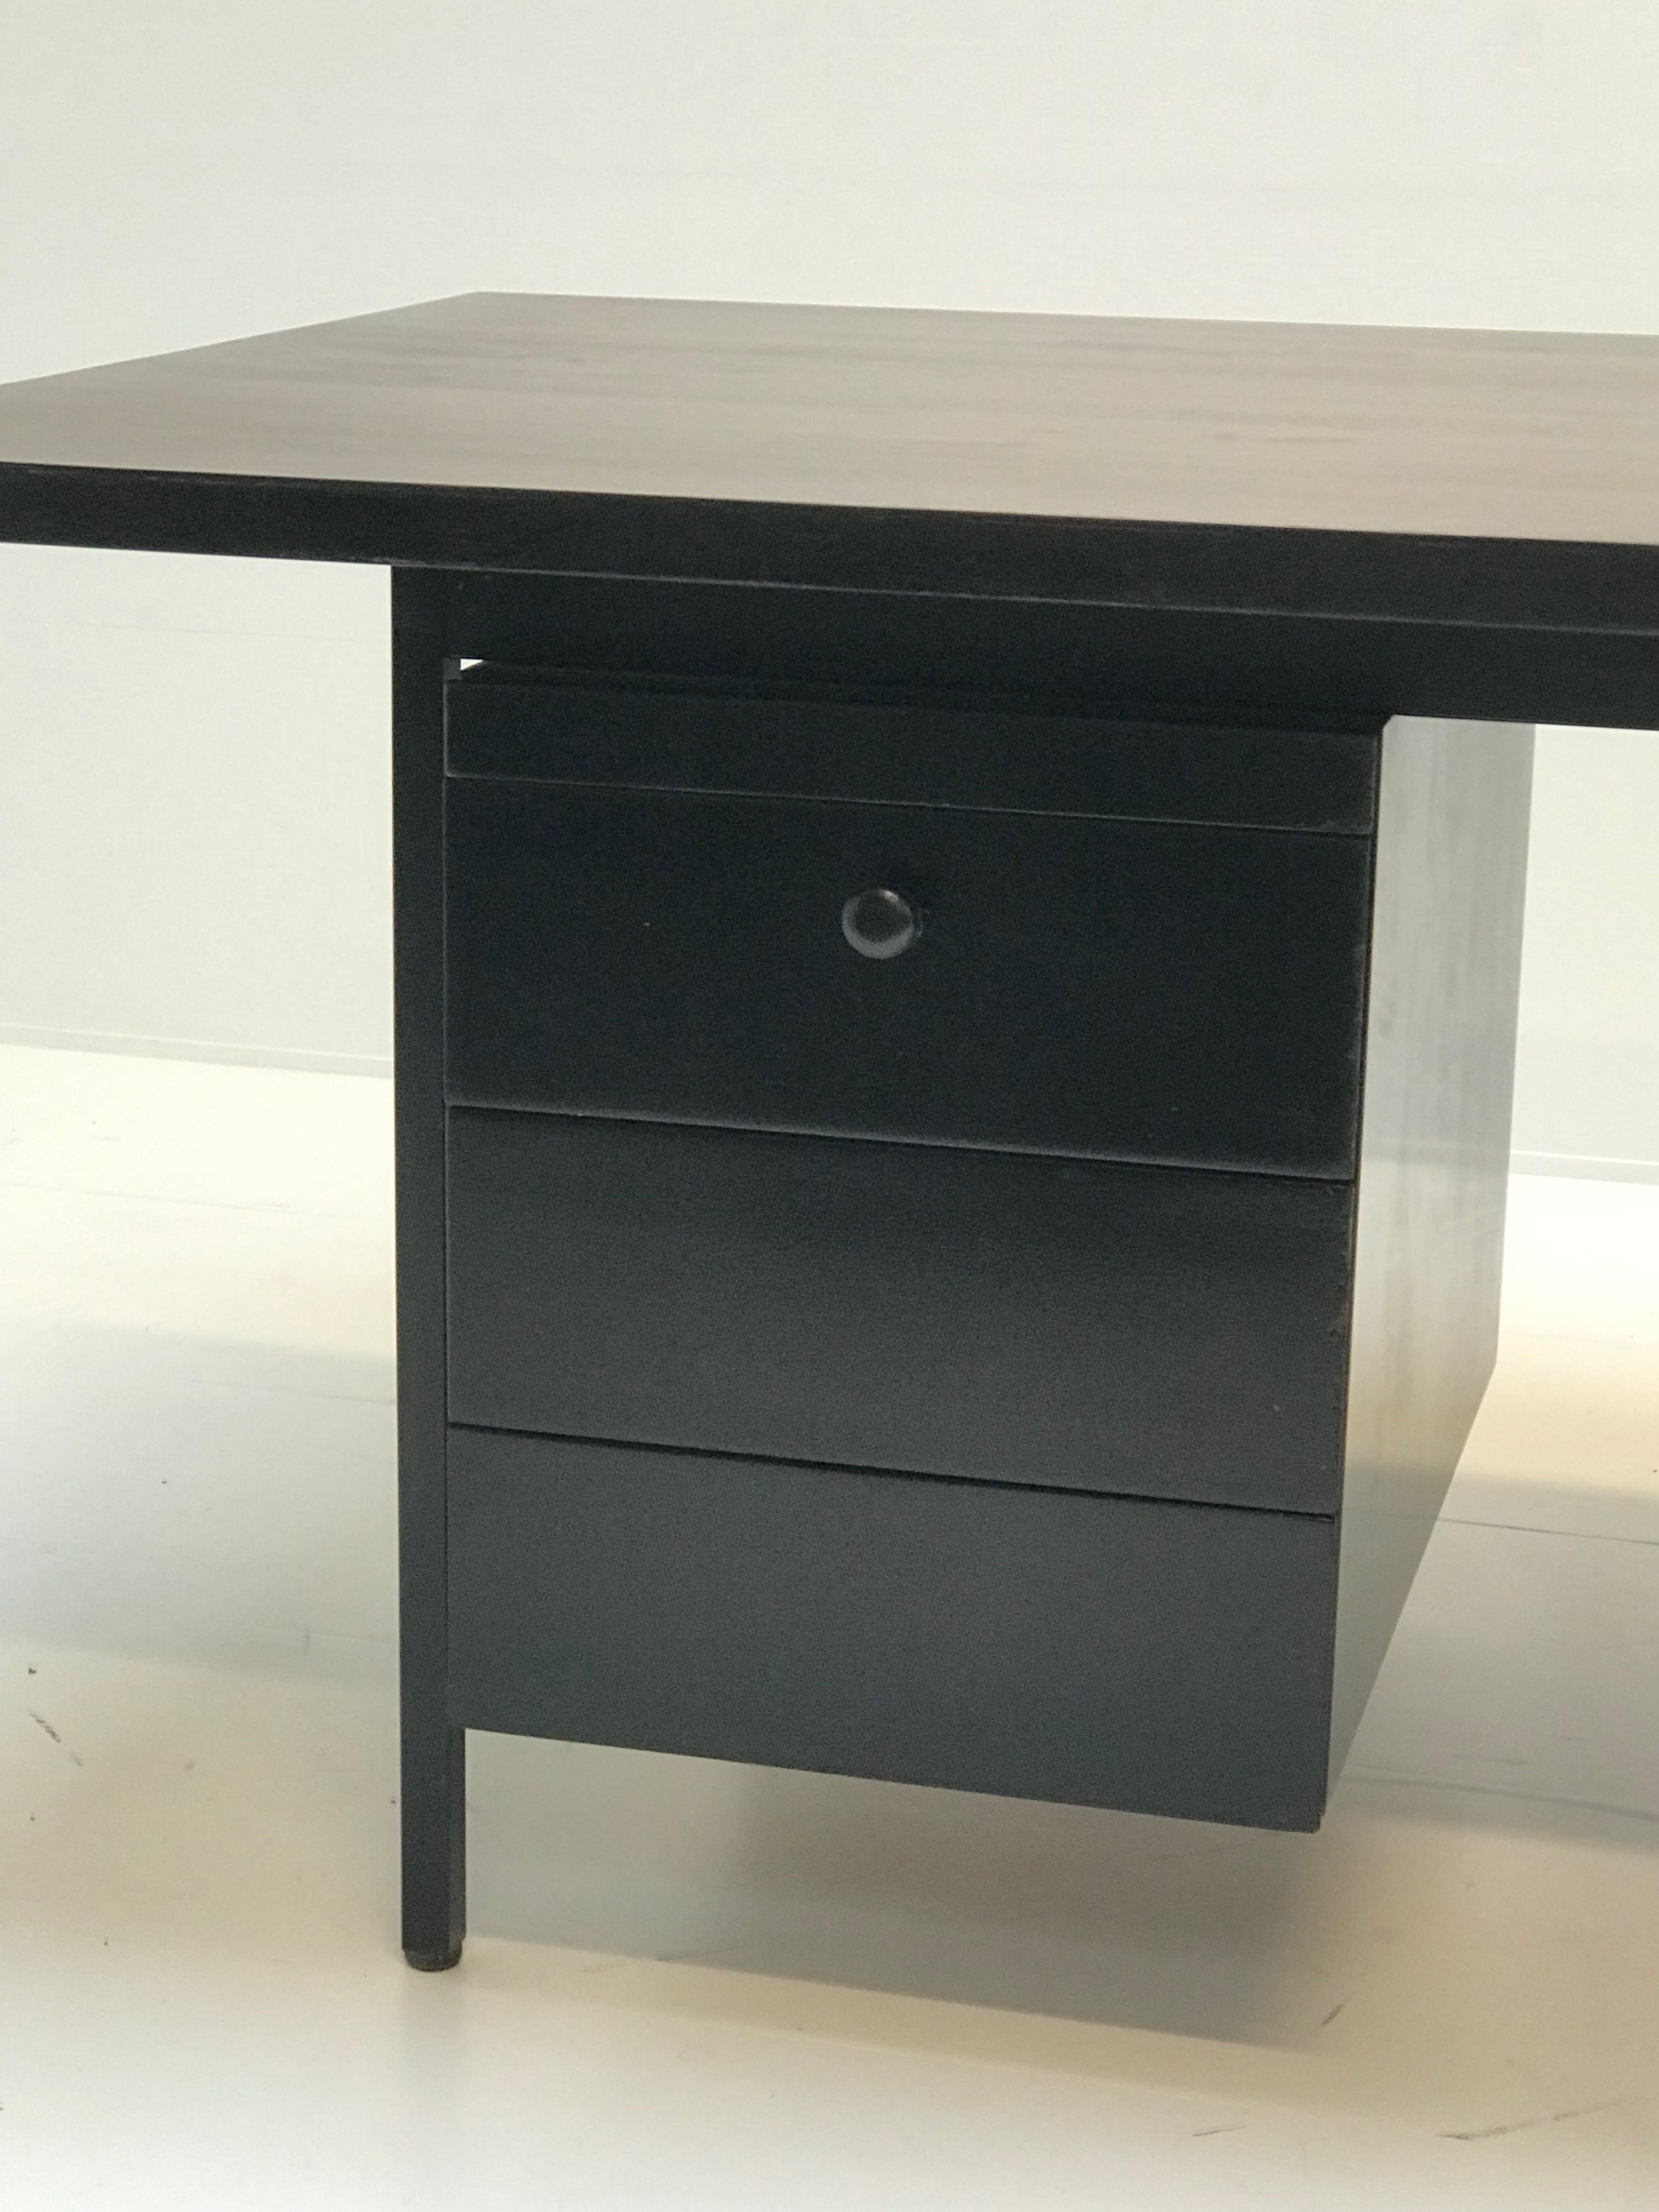 Elegant 2 colors desk by Florence Knoll
5 drawers an 2 extending parts.